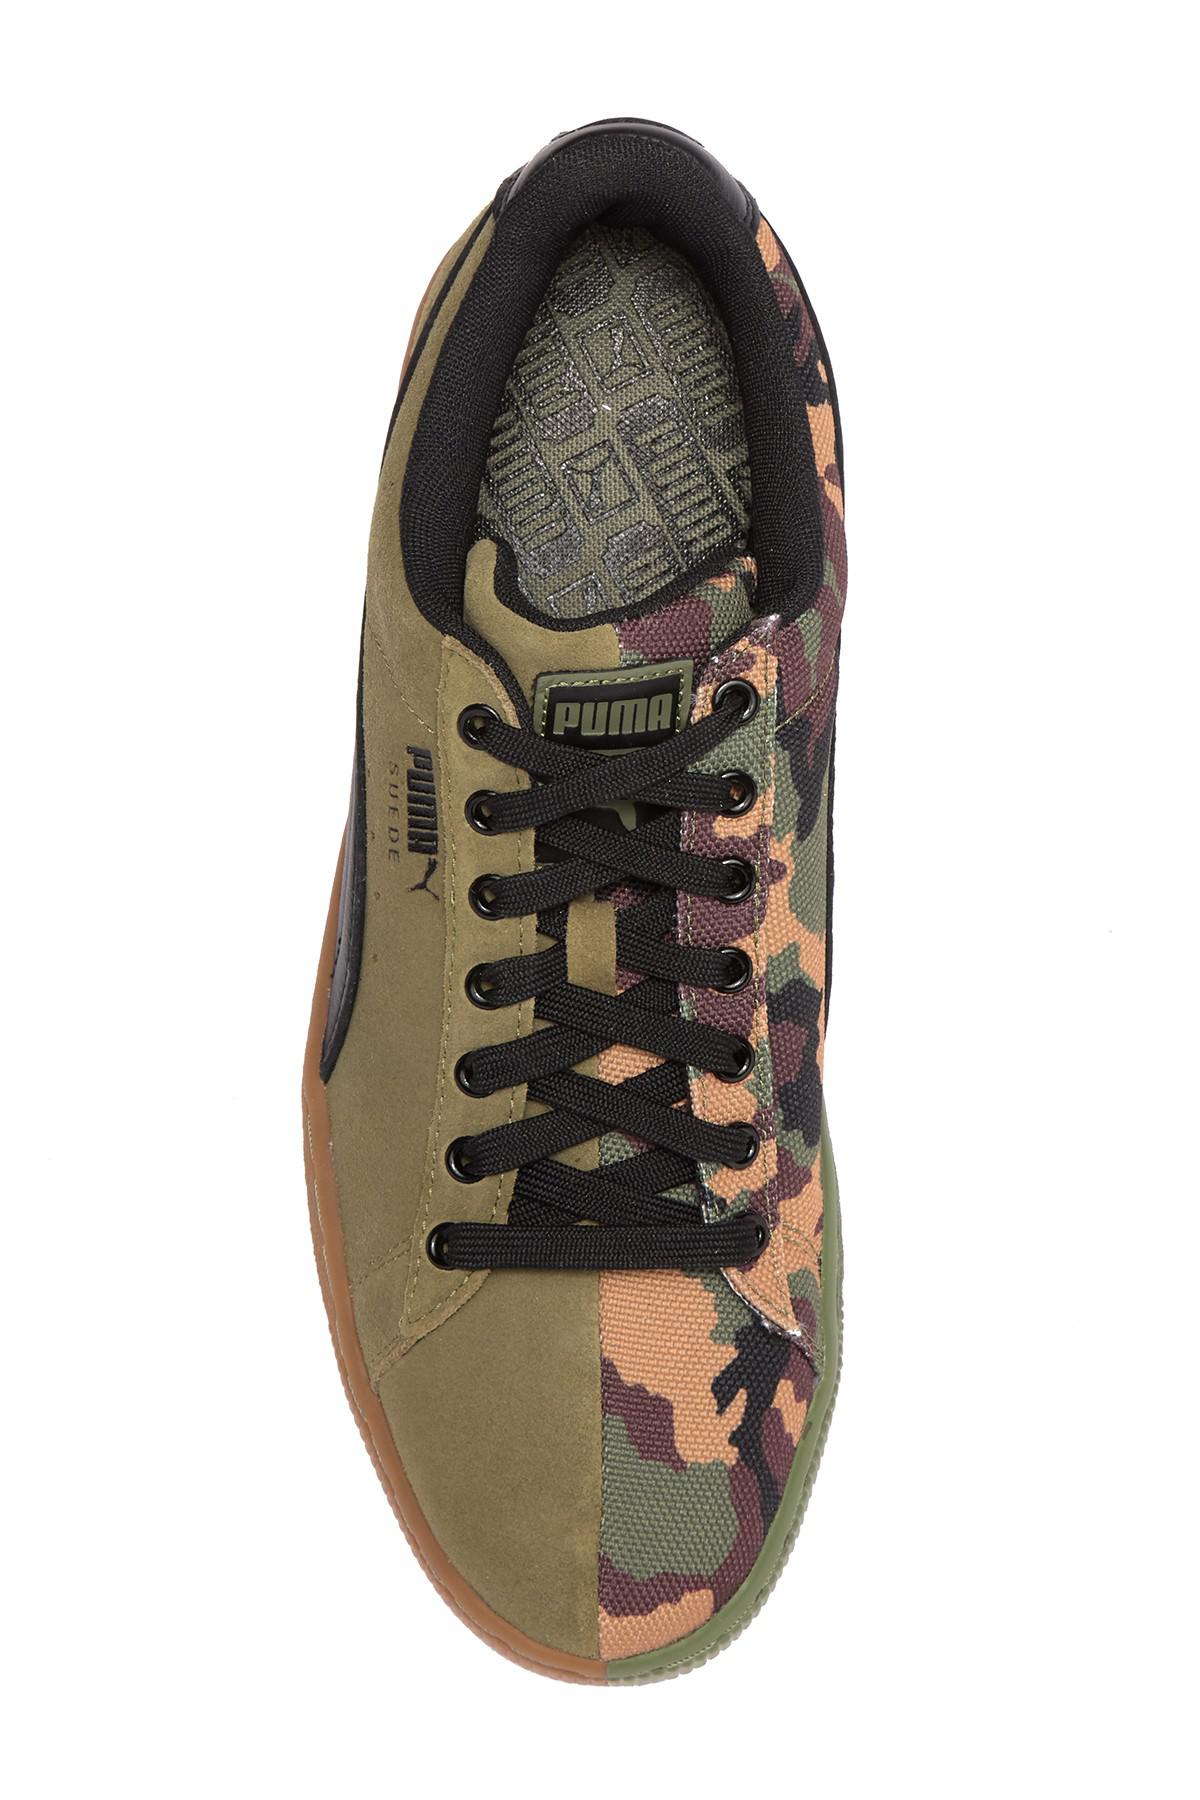 Puma Argentina Mens Shoes Green Camo Canvas Lace Up Sneakers Size 8 ...